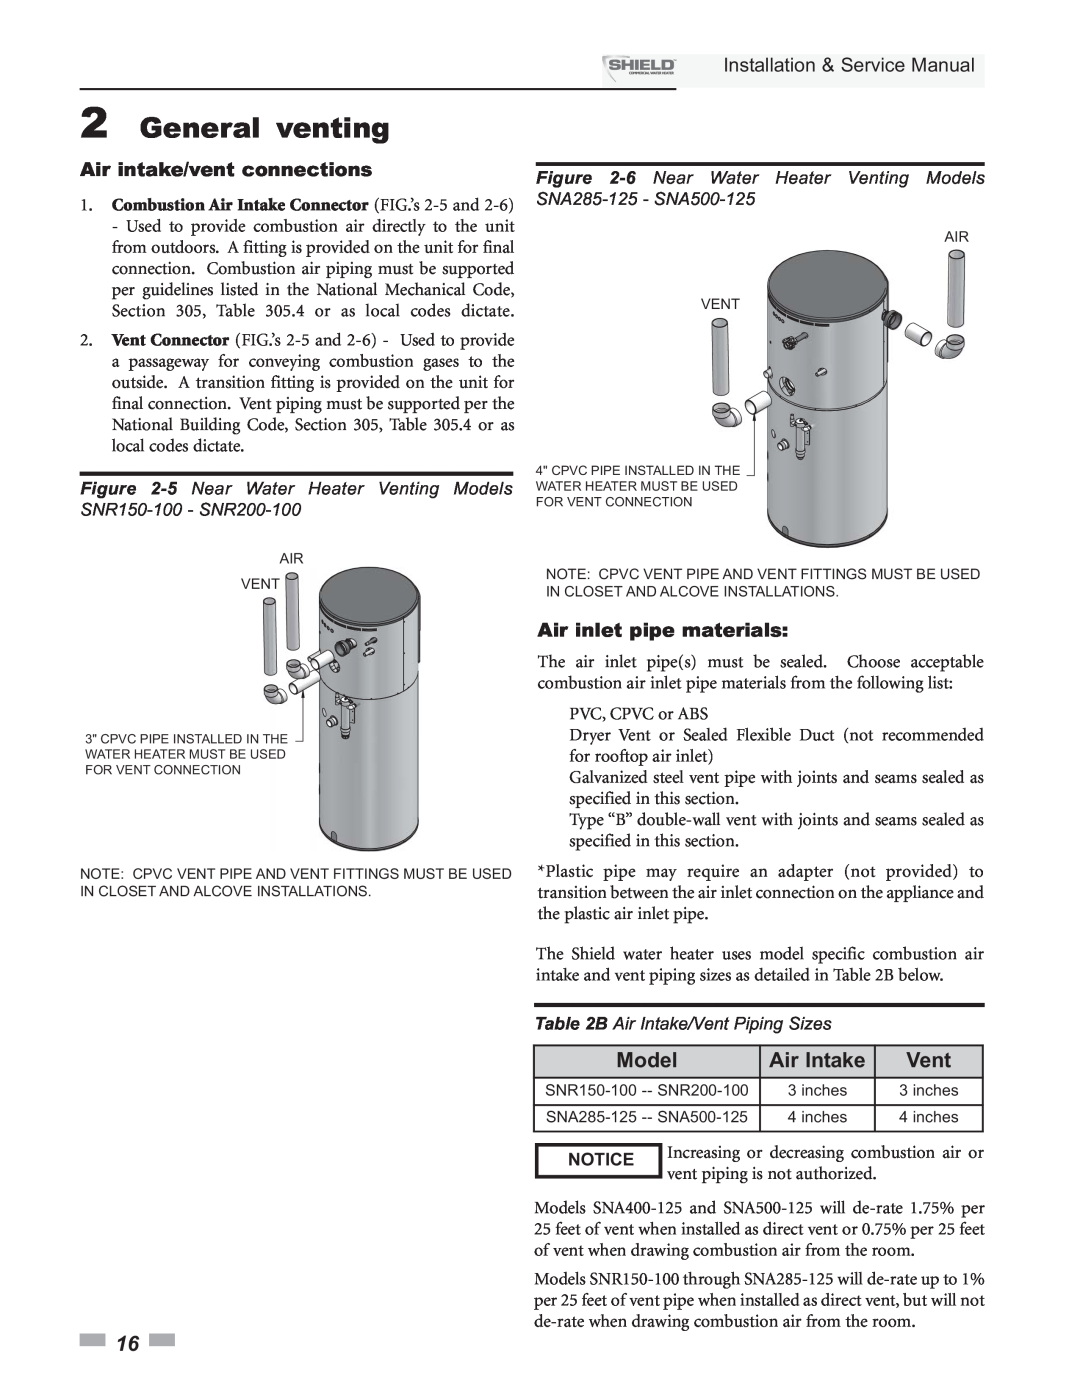 Lochinvar SNR200-100 Model, Air Intake, Vent, 2General venting, Installation & Service Manual, Air intake/vent connections 